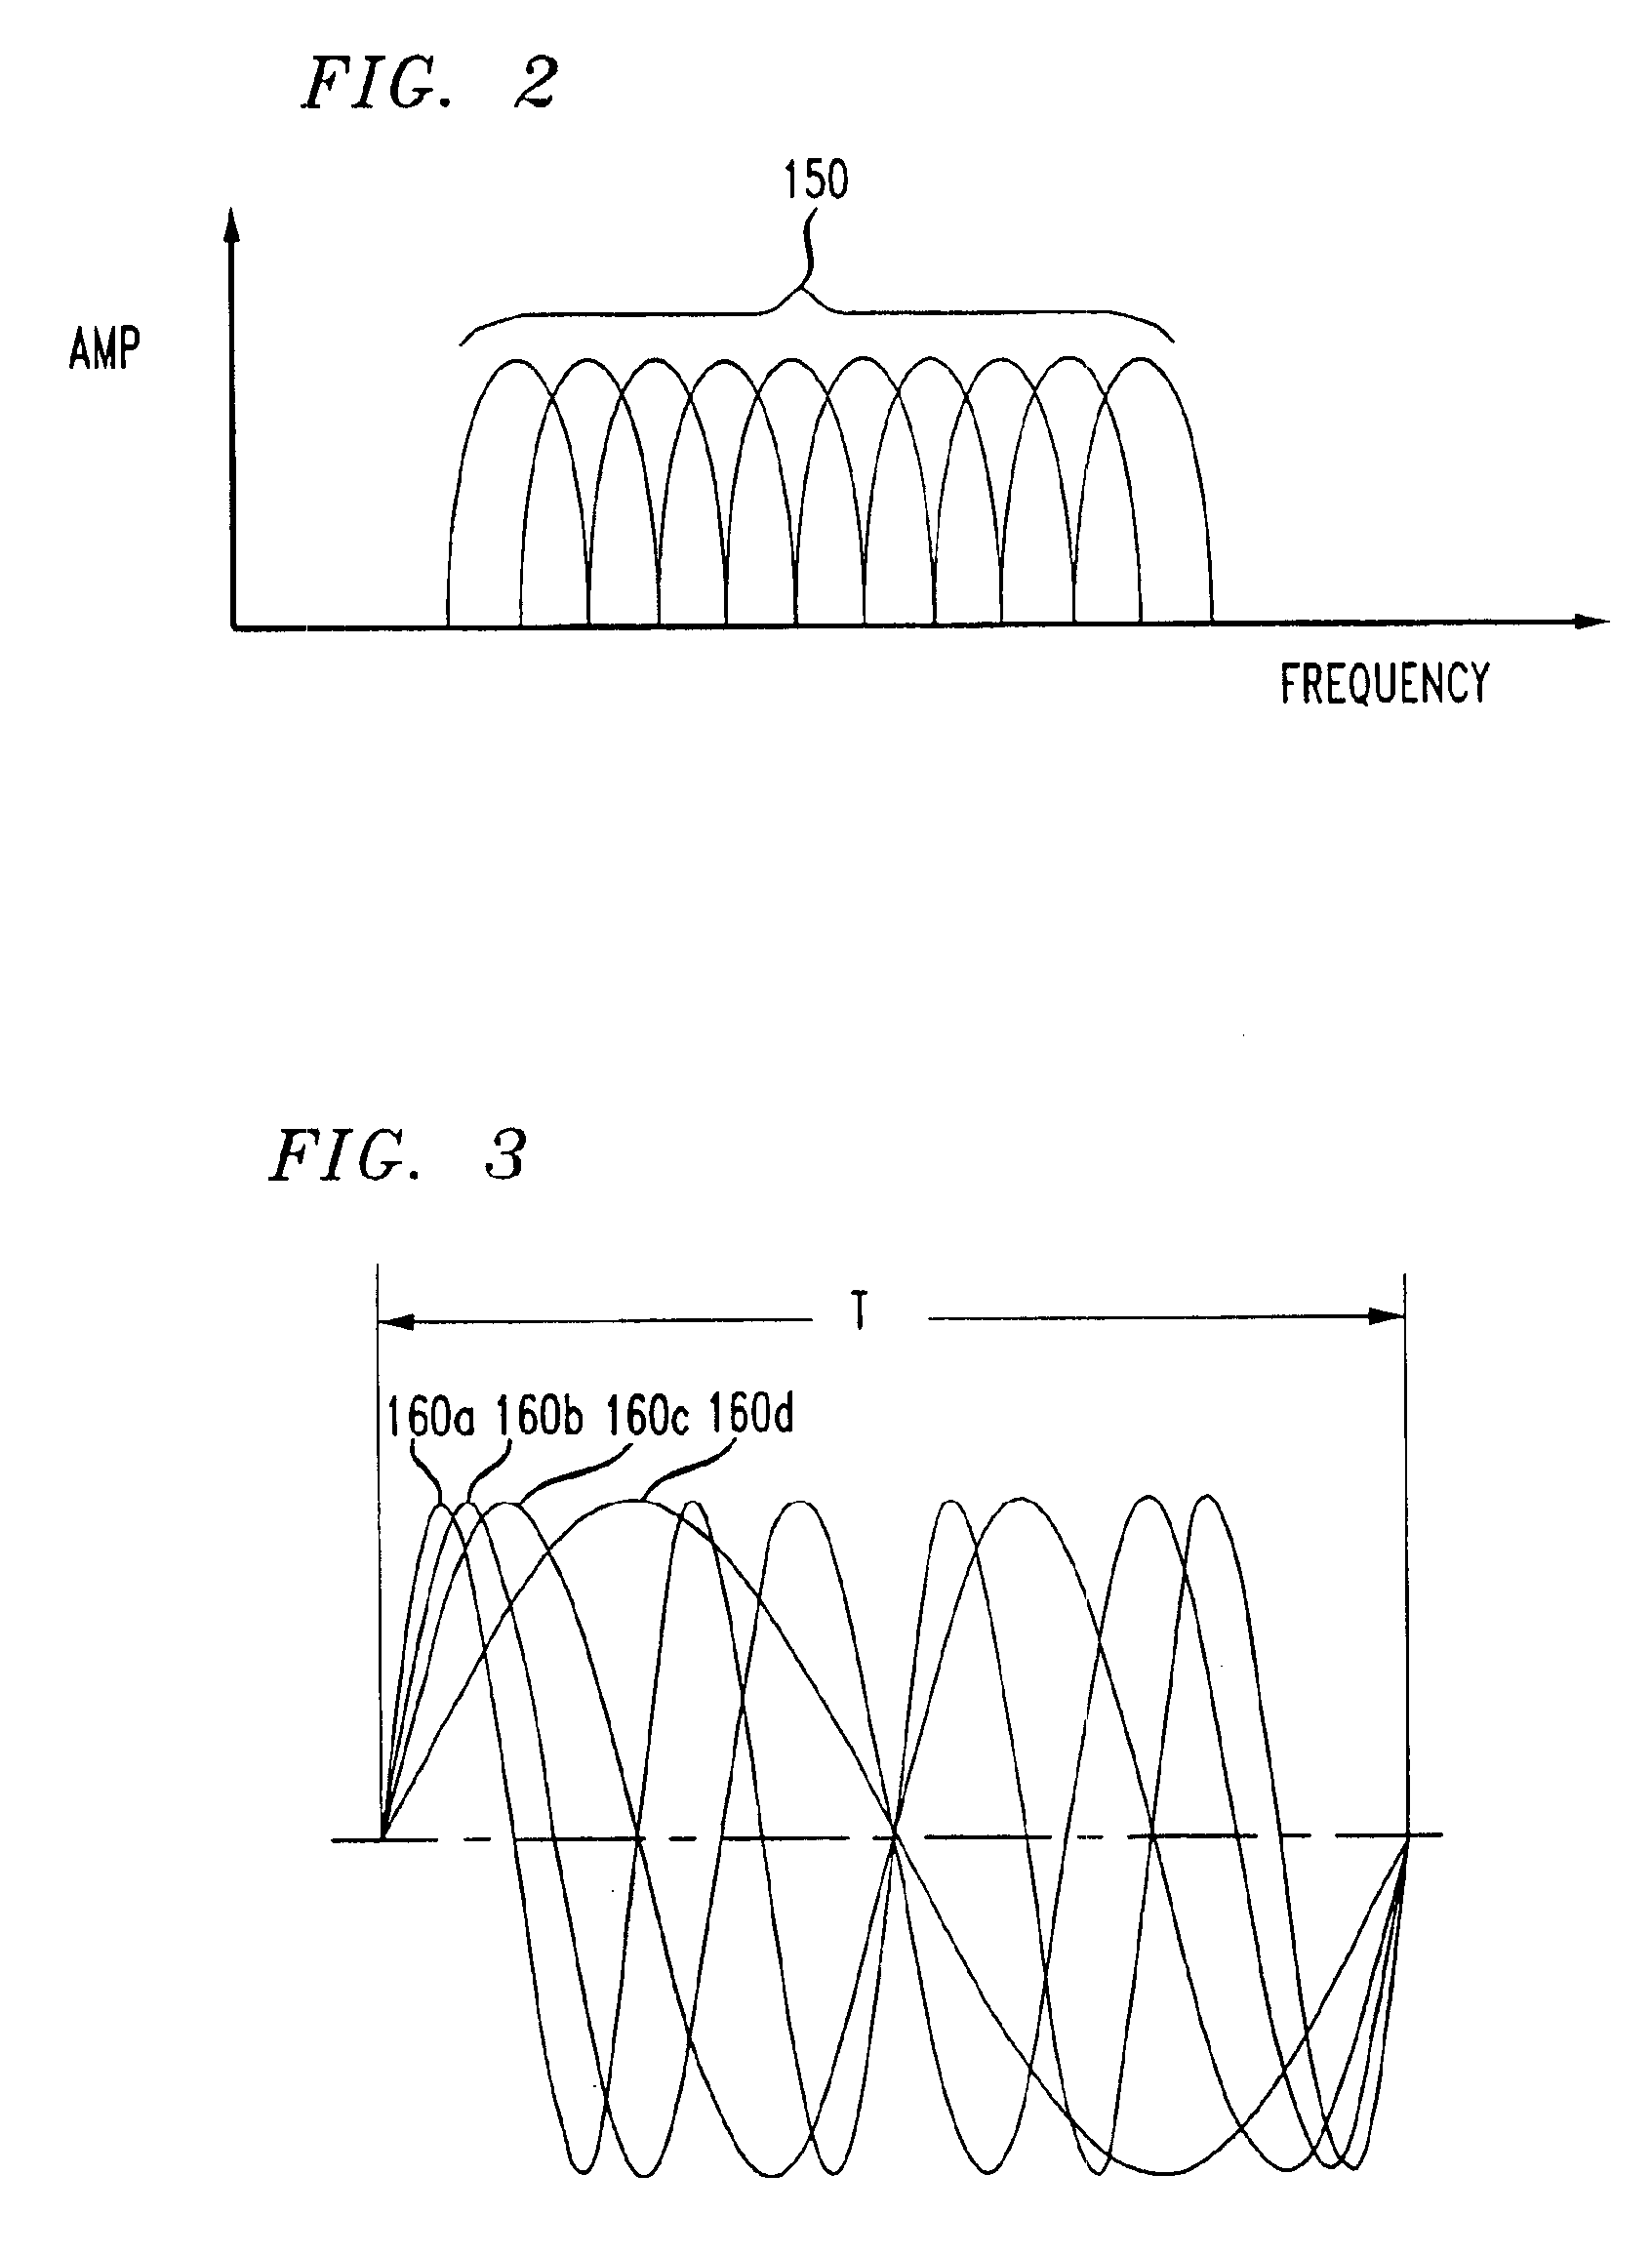 OFDM communication system and method having a reduced peak-to-average power ratio